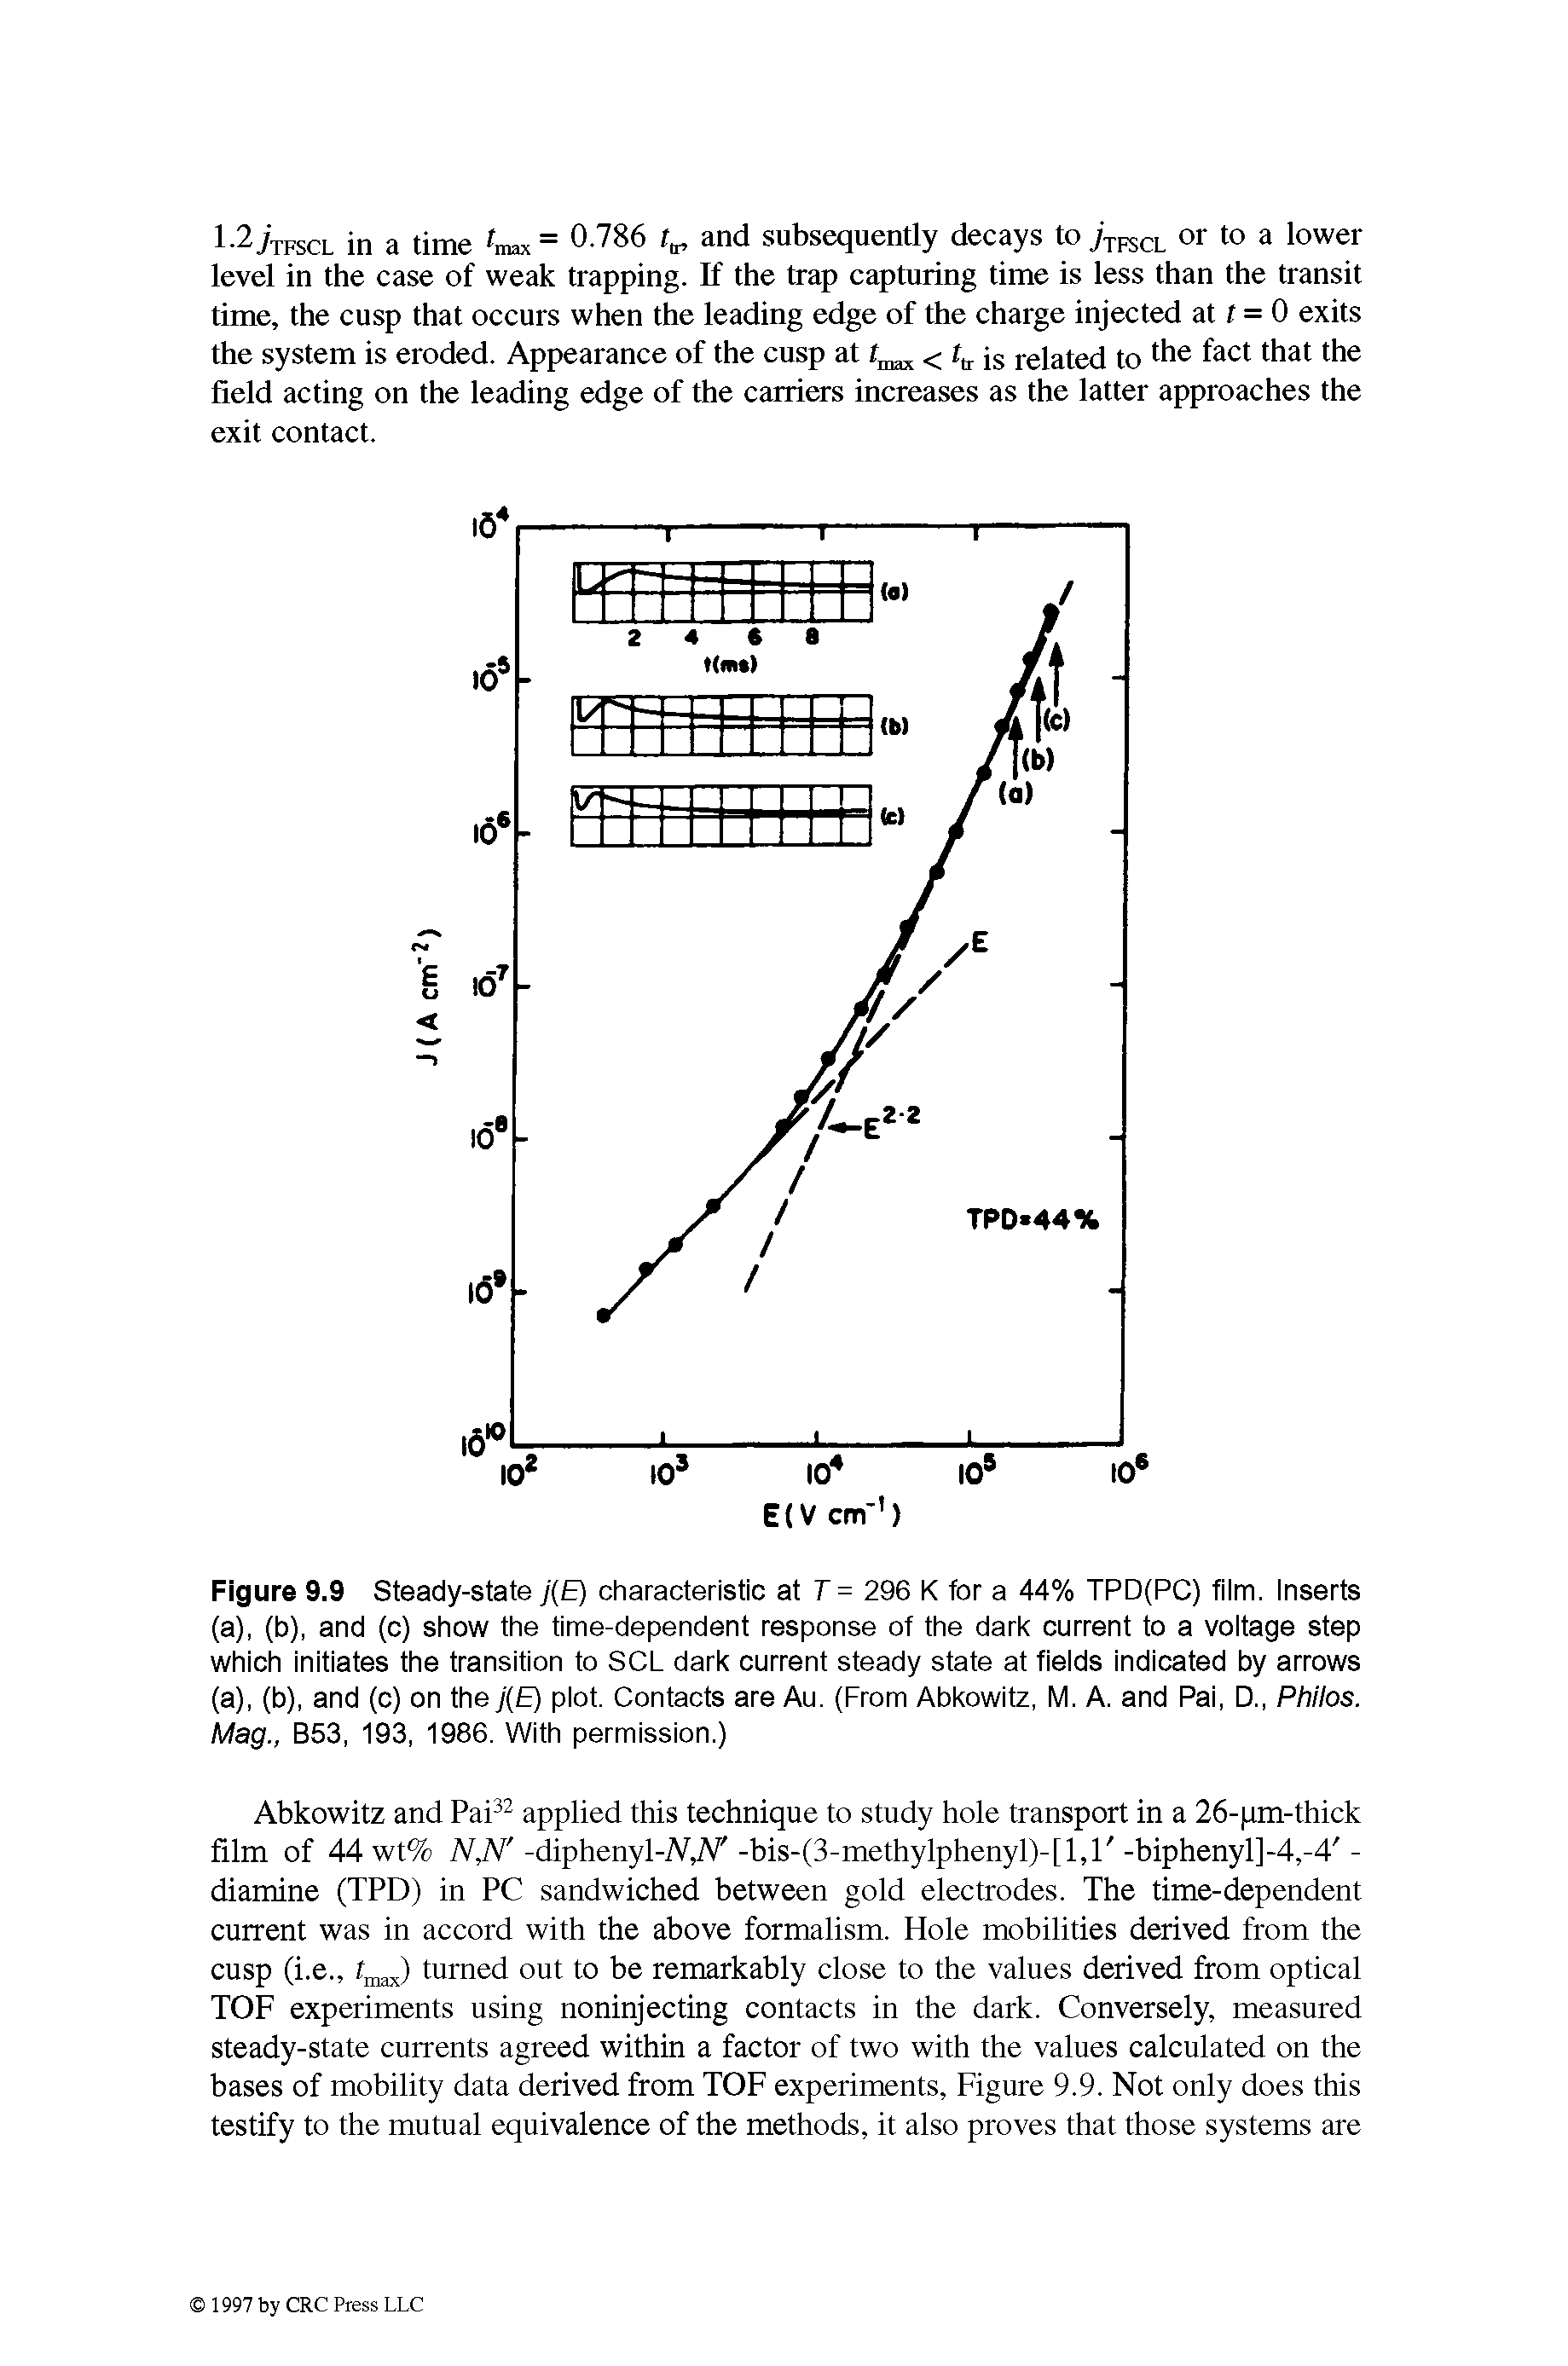 Figure 9.9 Steady-state y ( ) characteristic at T = 296 K for a 44% TPD(PC) fiim. inserts (a), (b), and (c) show the time-dependent response of the dark current to a voitage step which initiates the transition to SCL dark current steady state at fieids indicated by arrows (a), (b), and (c) on the J E) piot. Contacts are Au. (From Abkowitz, M. A. and Pai, D., Philos. Mag., B53, 193, 1986. With permission.)...